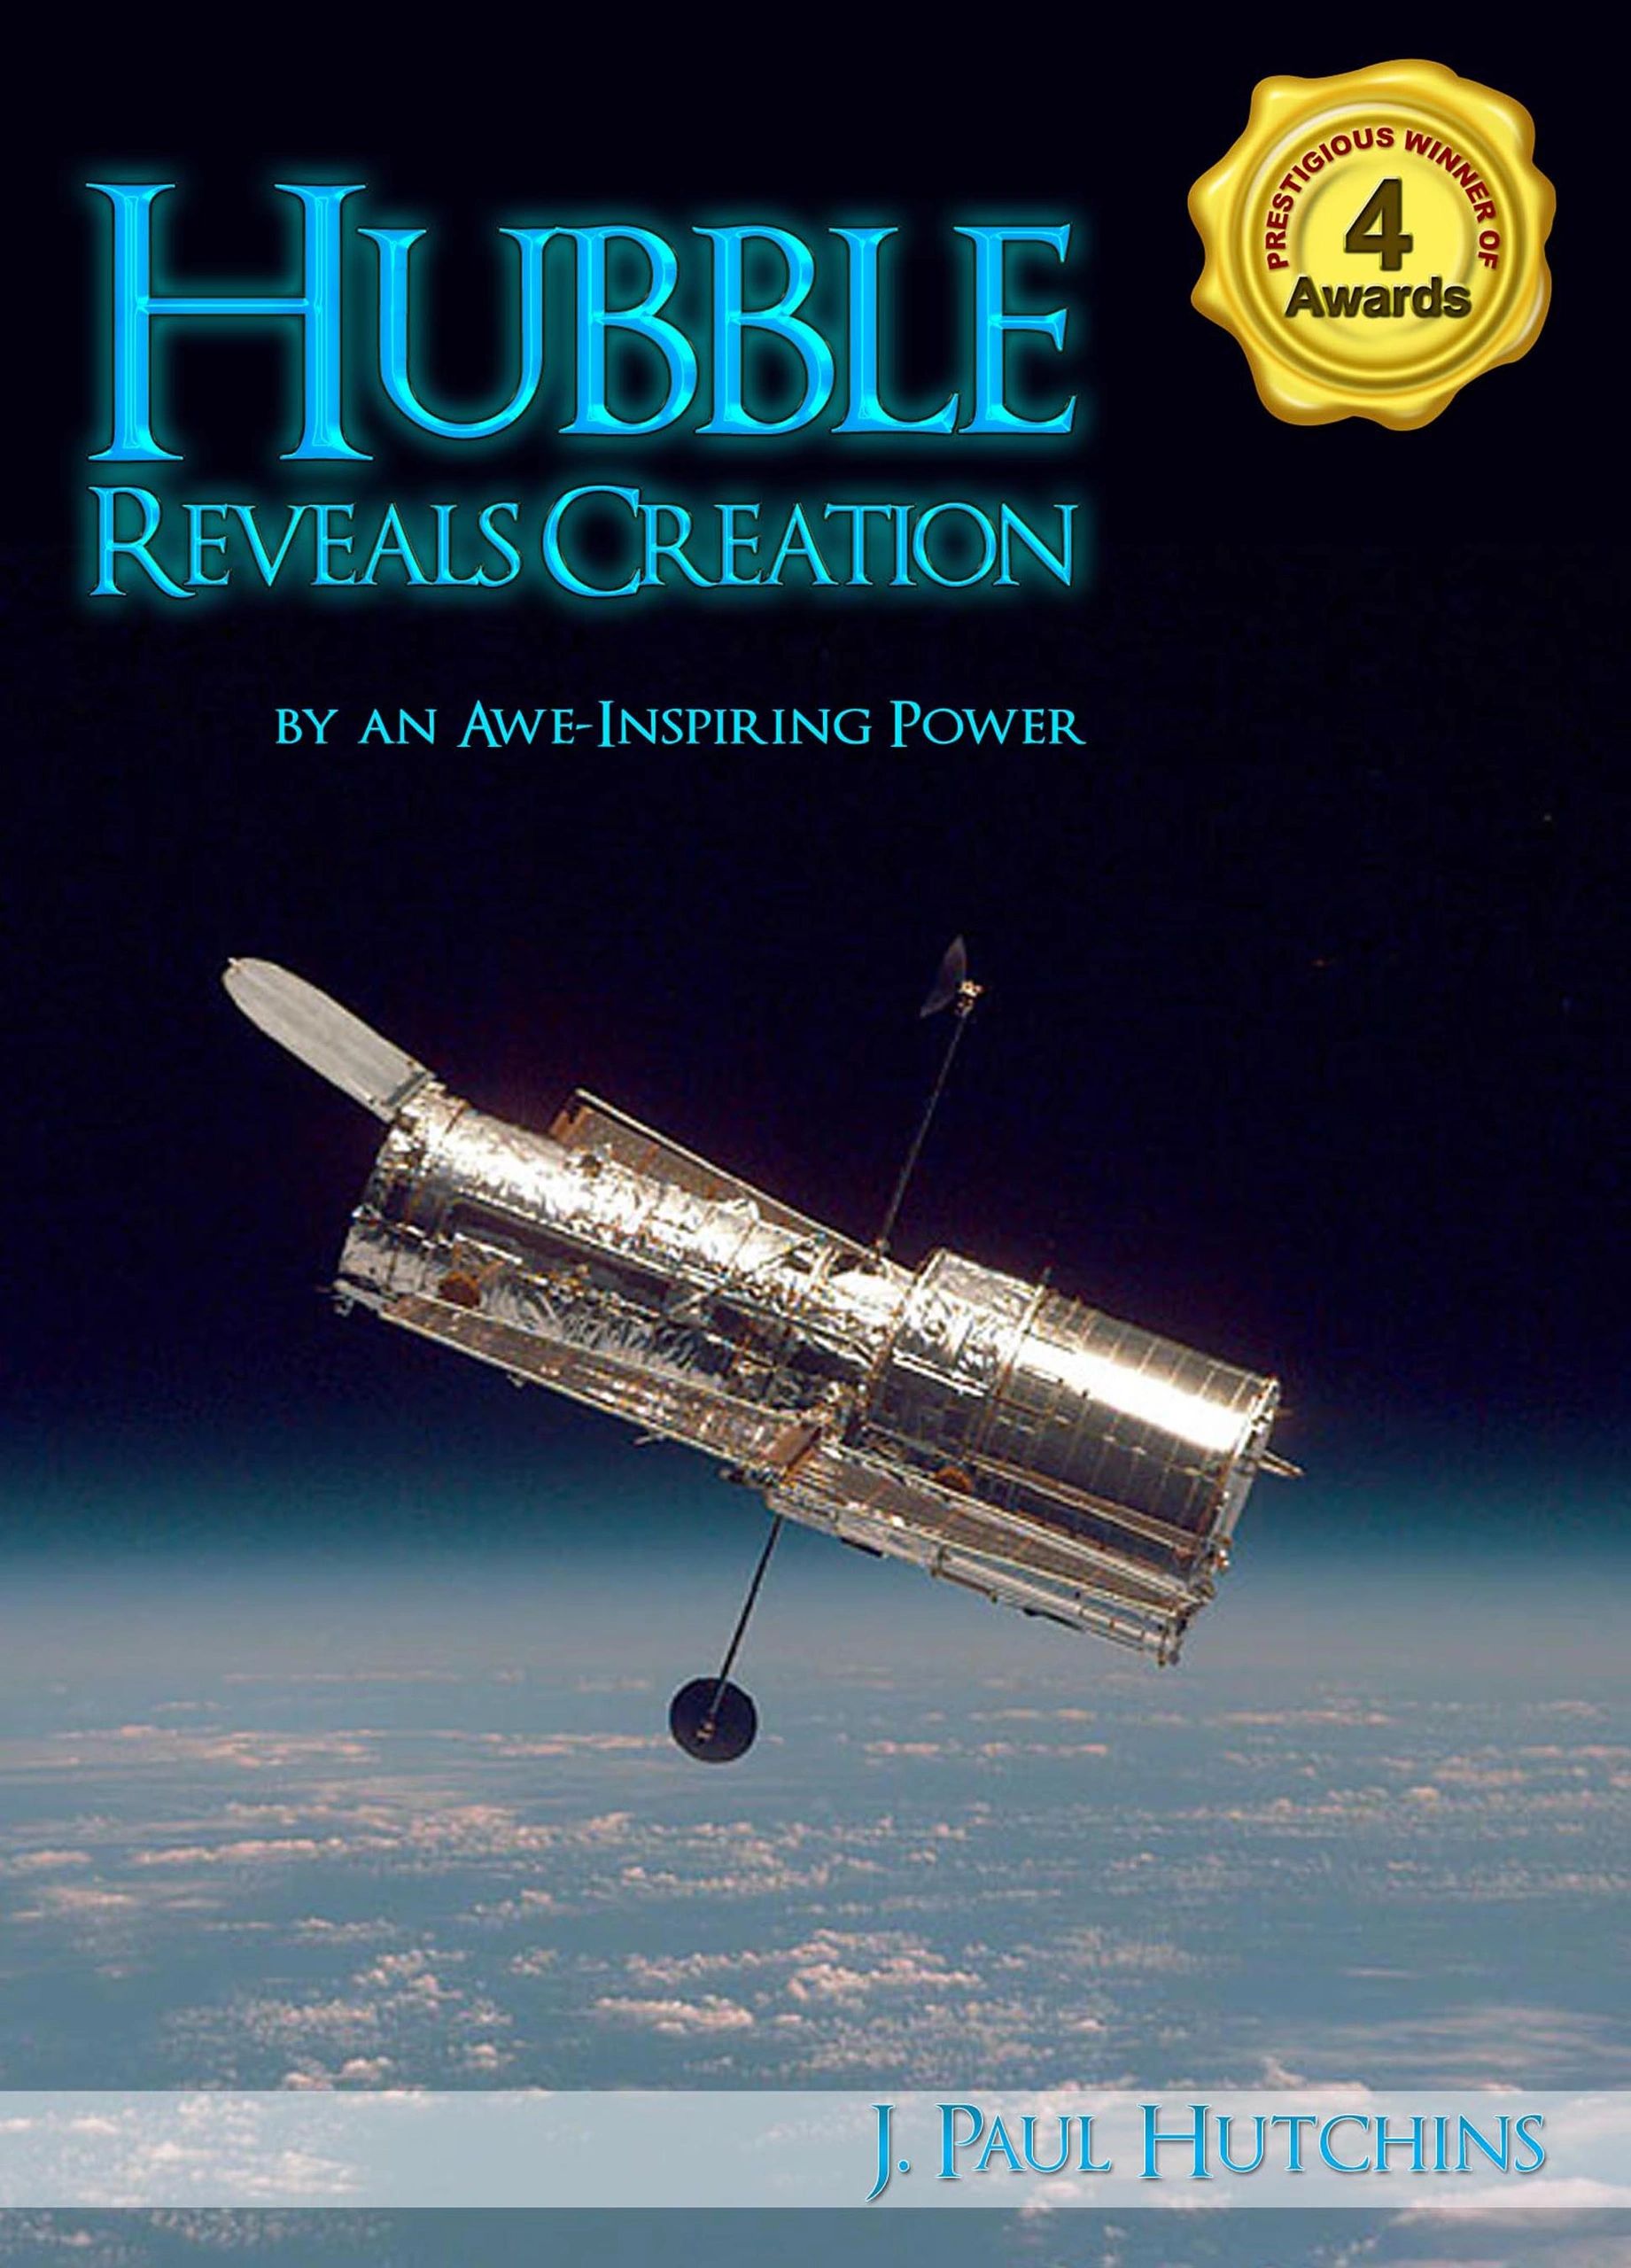 Hubble Reveals Creation eBook cover image